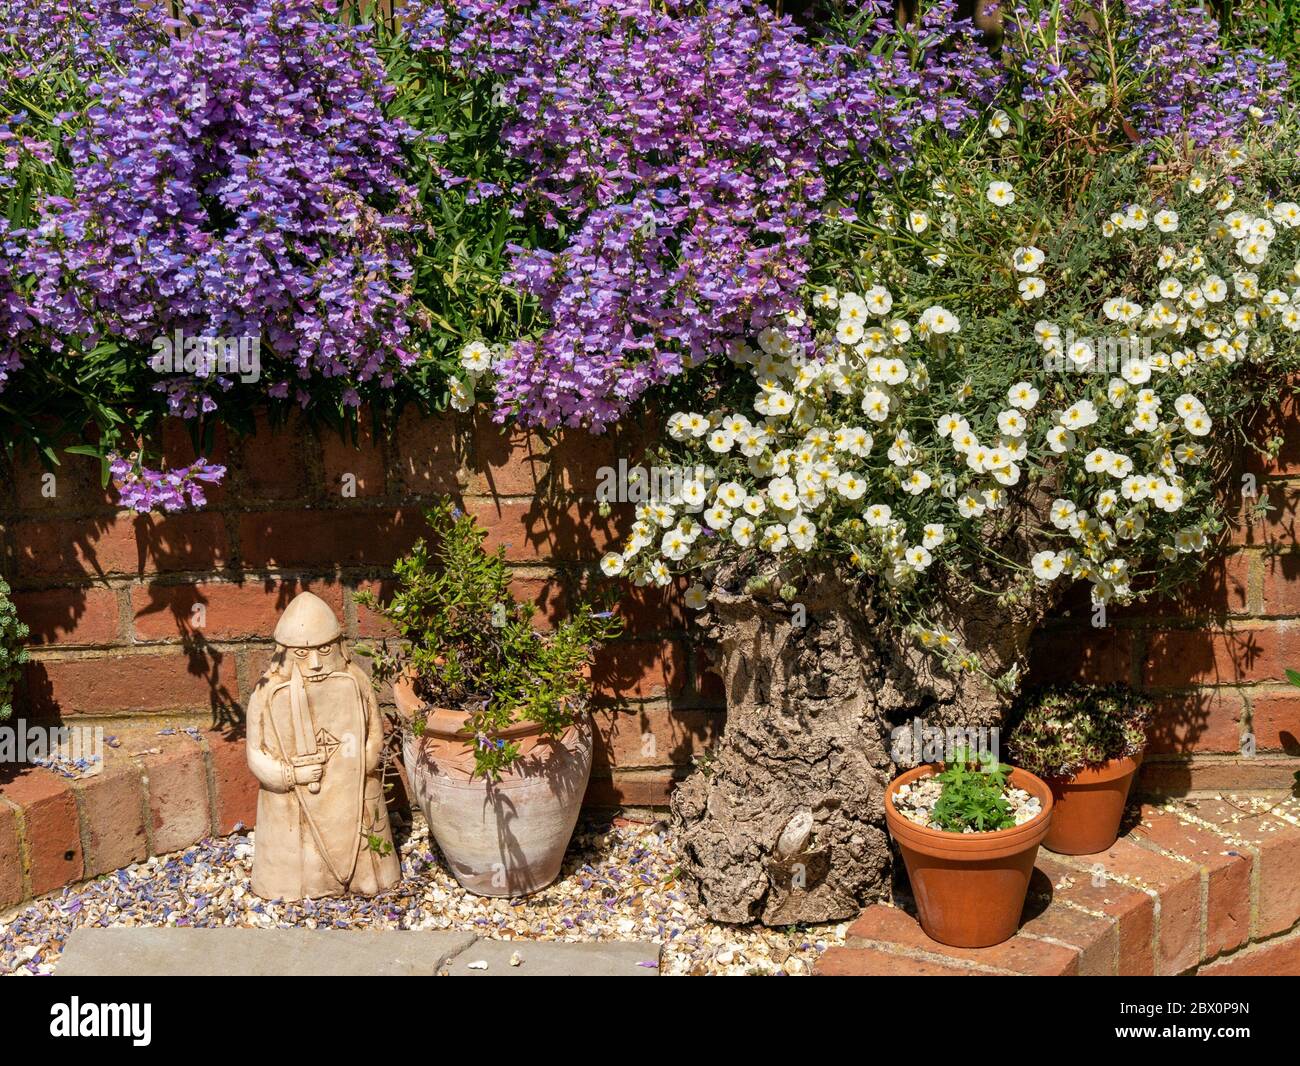 Heavenly Blue Penstemon white rock rose (Cistus salviifolius) flowers trailing over red brick wall with pots & ornaments in English Cottage Garden, UK Stock Photo